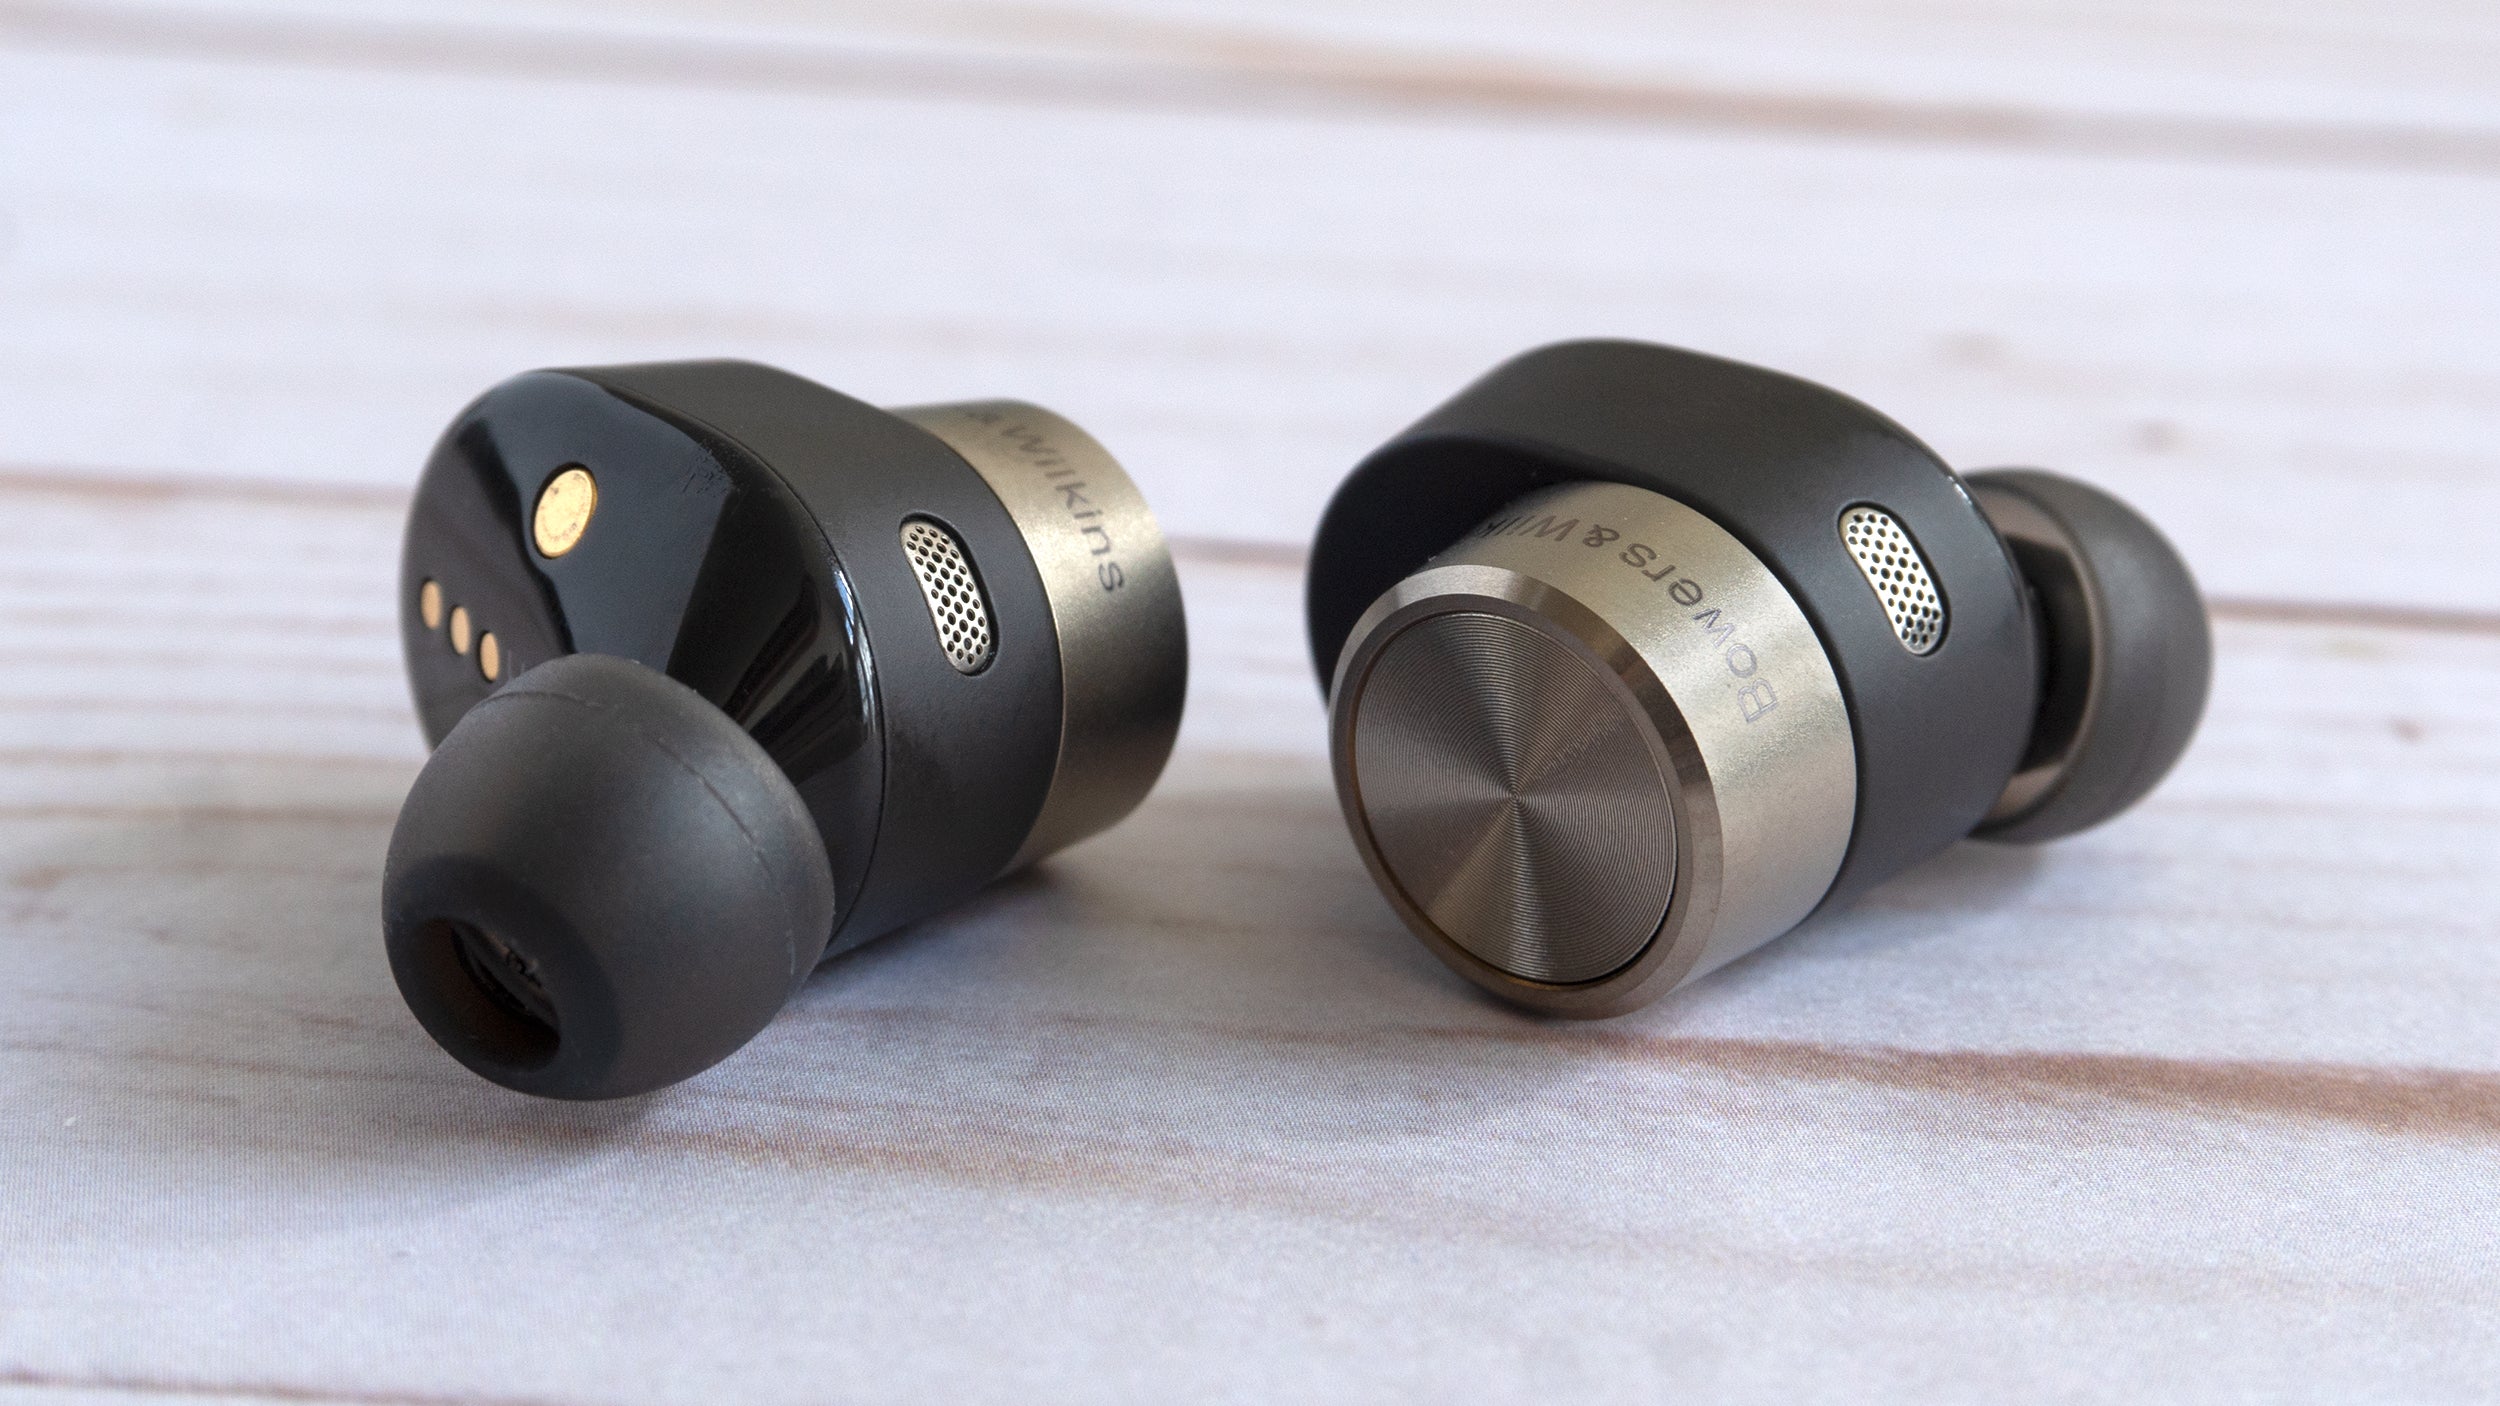 The PI7s are some of the best sounding wireless earbuds I've tested, but not quite the best of the best. (Photo: Andrew Liszewski/Gizmodo)